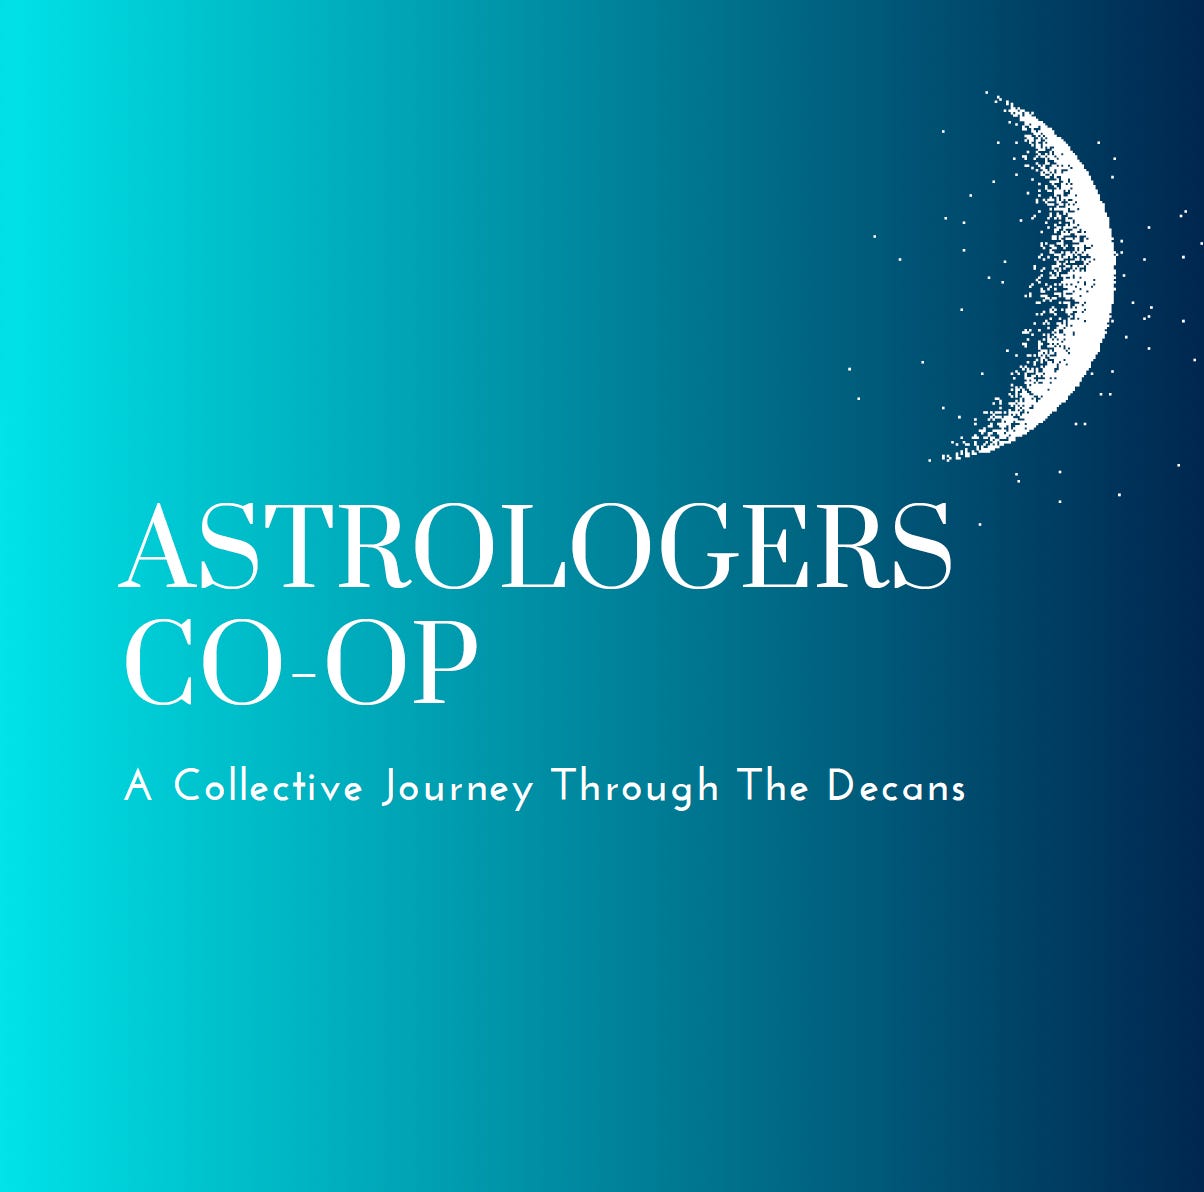 The Astrologers' Co-Op: Journey through the Decans